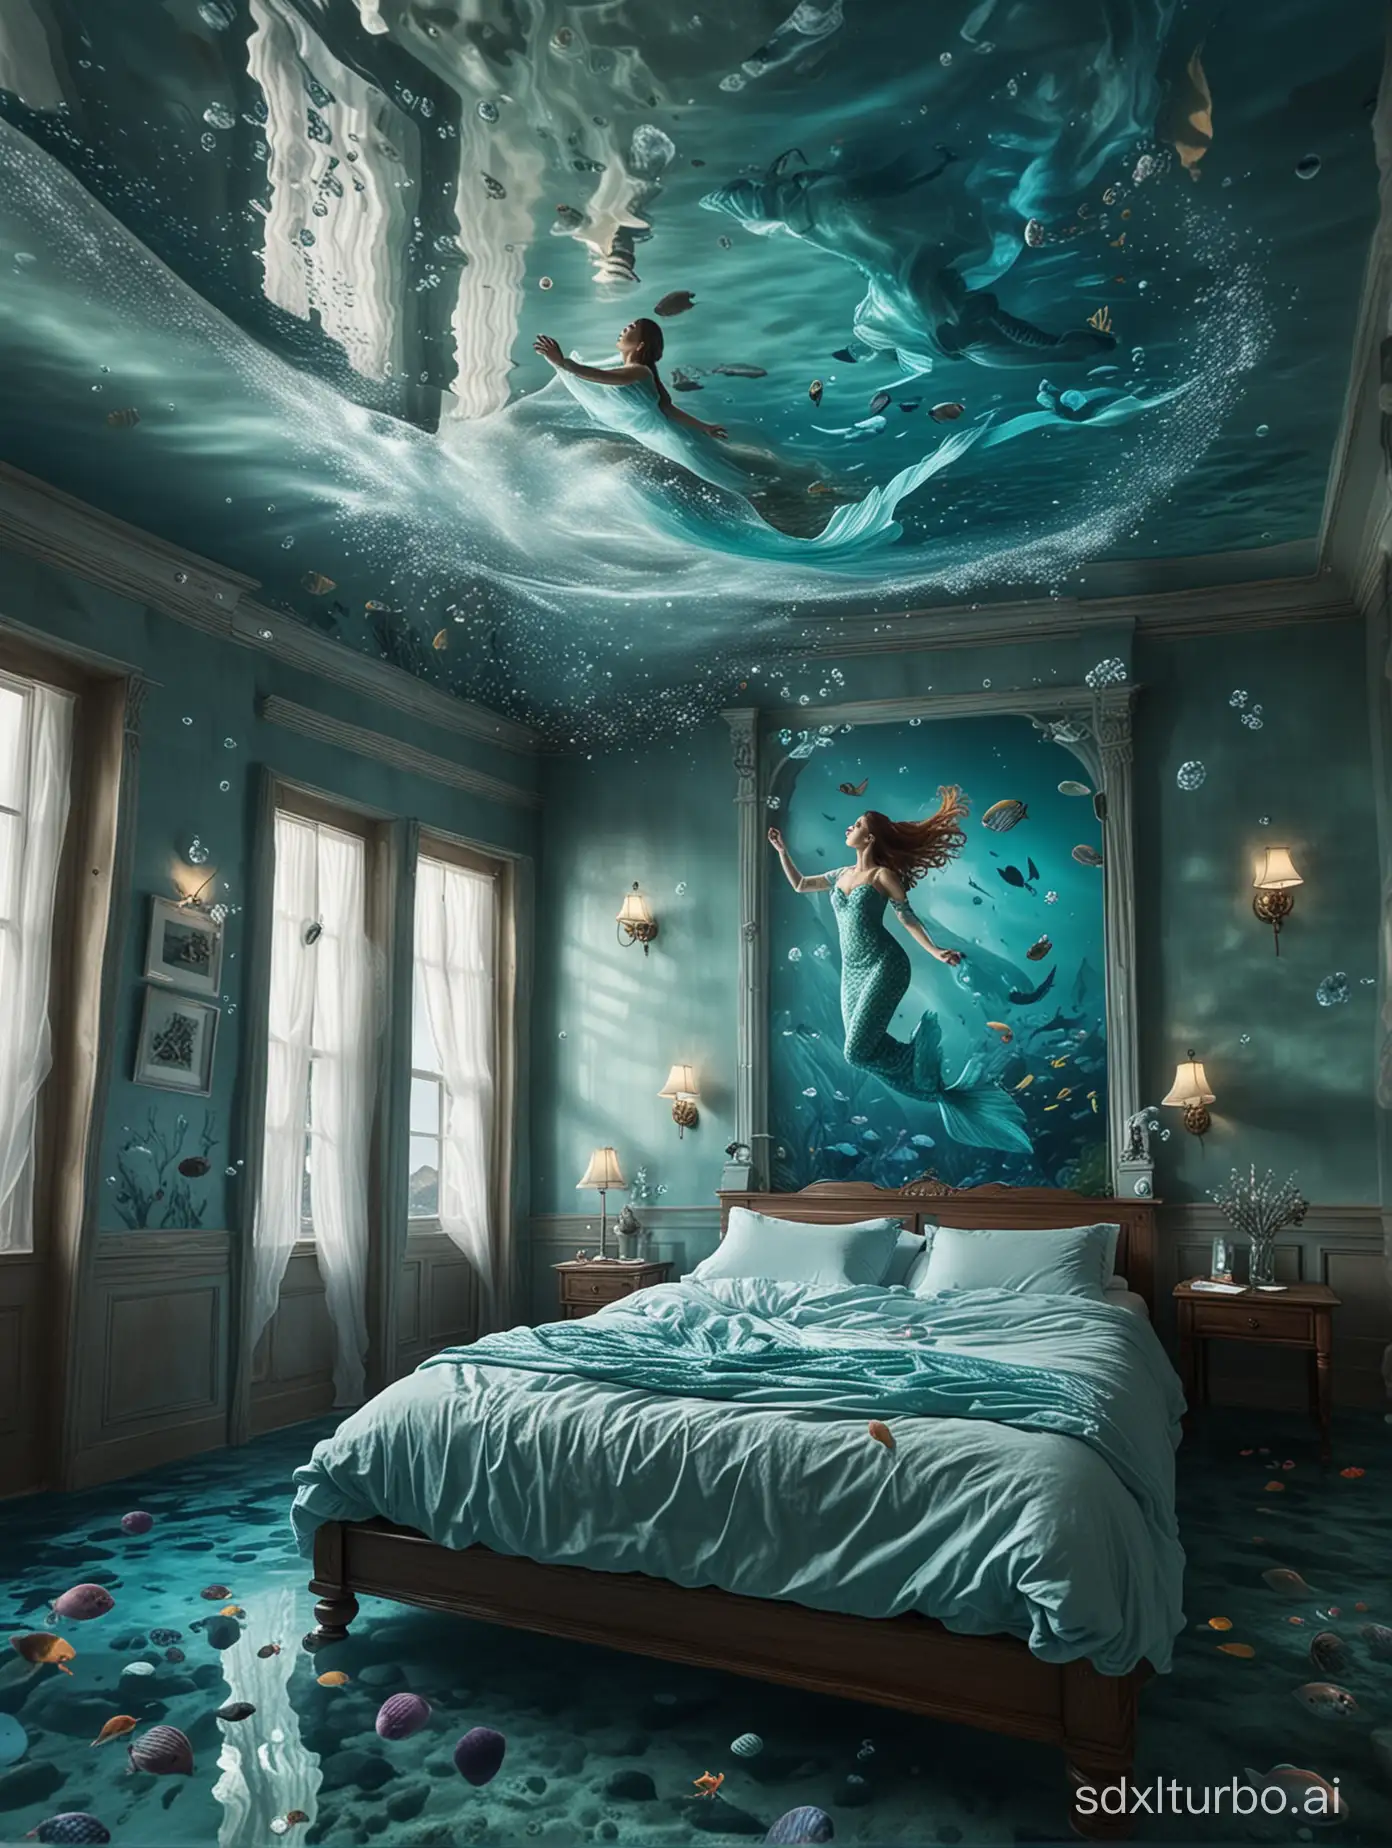 Immerse yourself in an unusual underwater bedroom where a beautiful woman floats in the air above the bed, creating the illusion of floating underwater in a beautiful mermaid-like dress, adding a colorful touch to the surreal ambiance of the room, the walls set the tone for a realistic aquatic atmosphere filled with bubbles, sea life and marine life. Natural light streams in through the window, enhancing the illusion of an underwater world.